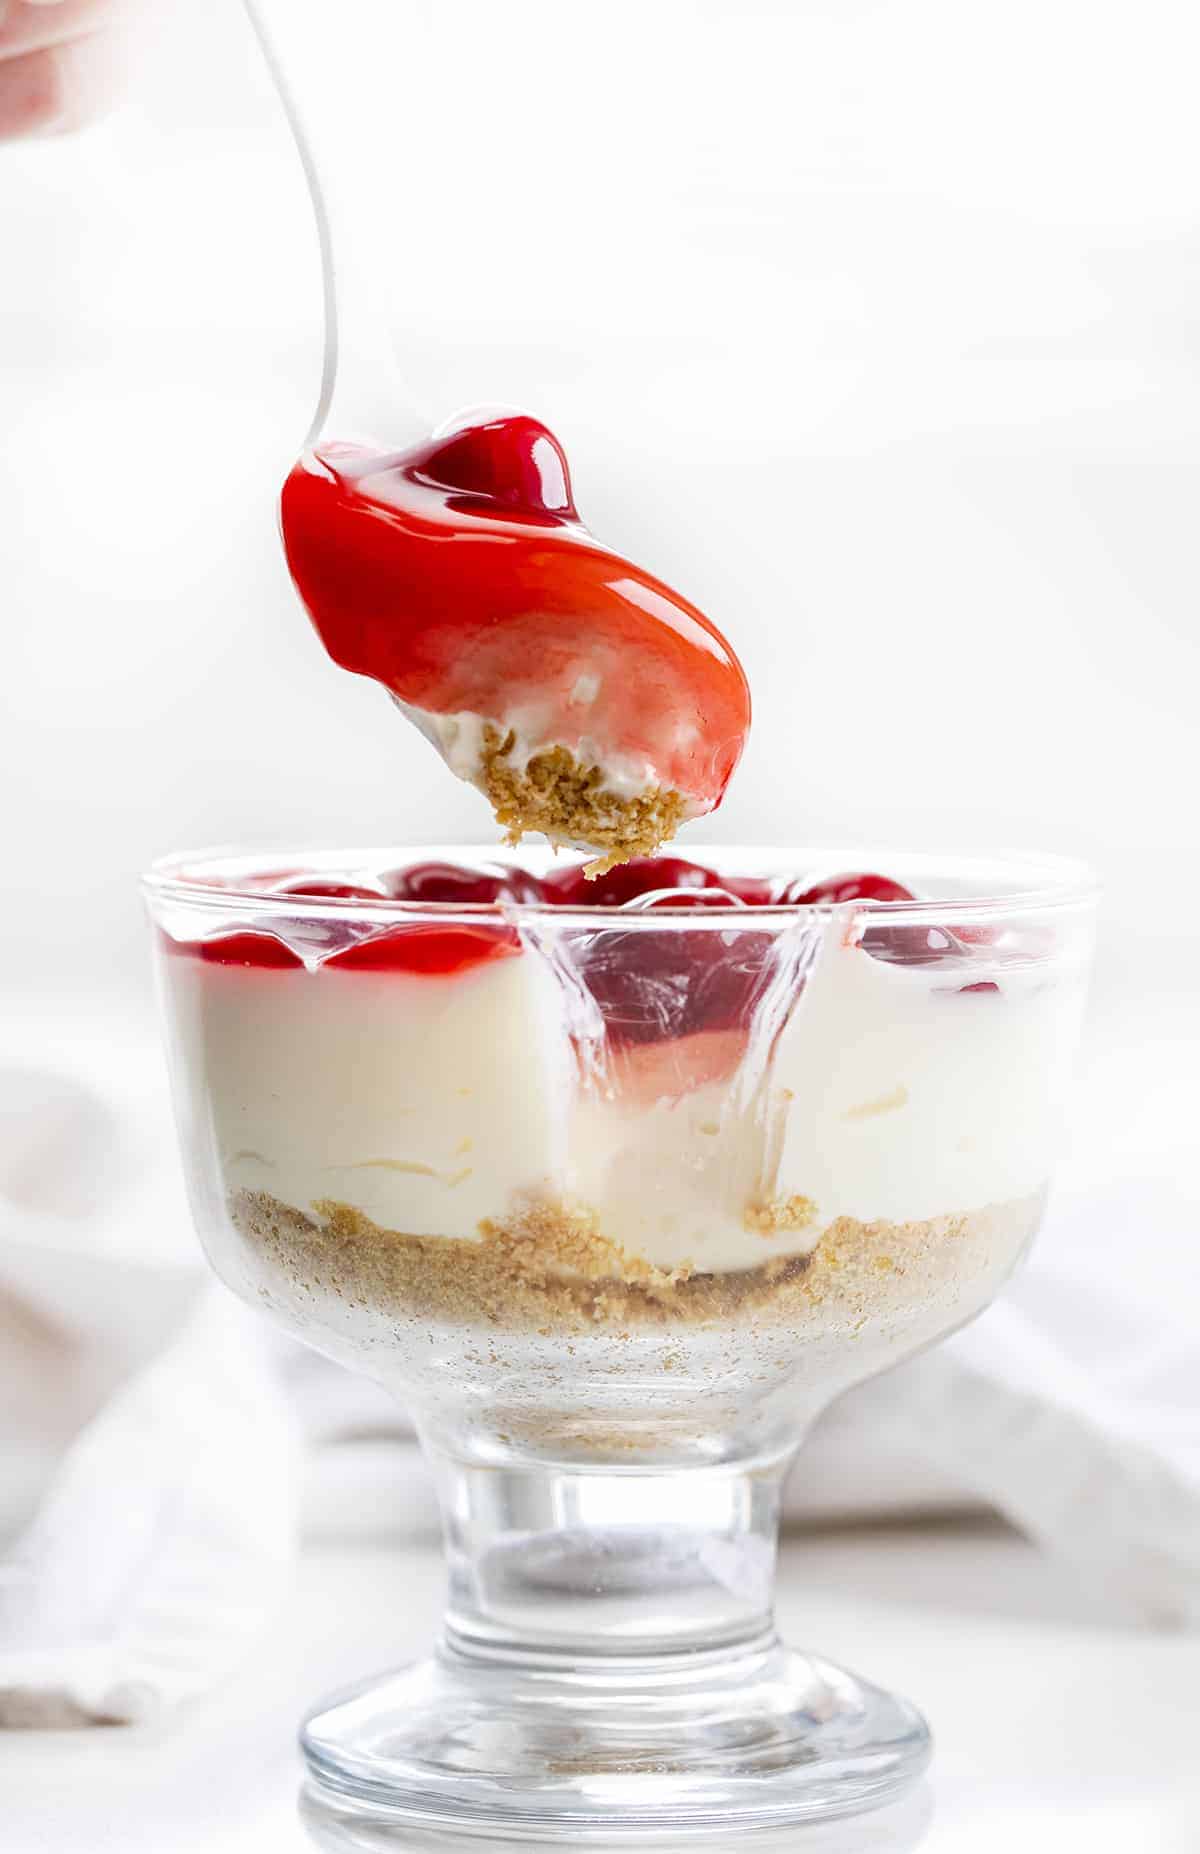 Spoon Taking a Bite out of No-Bake Cherry Cheesecake Parfait.